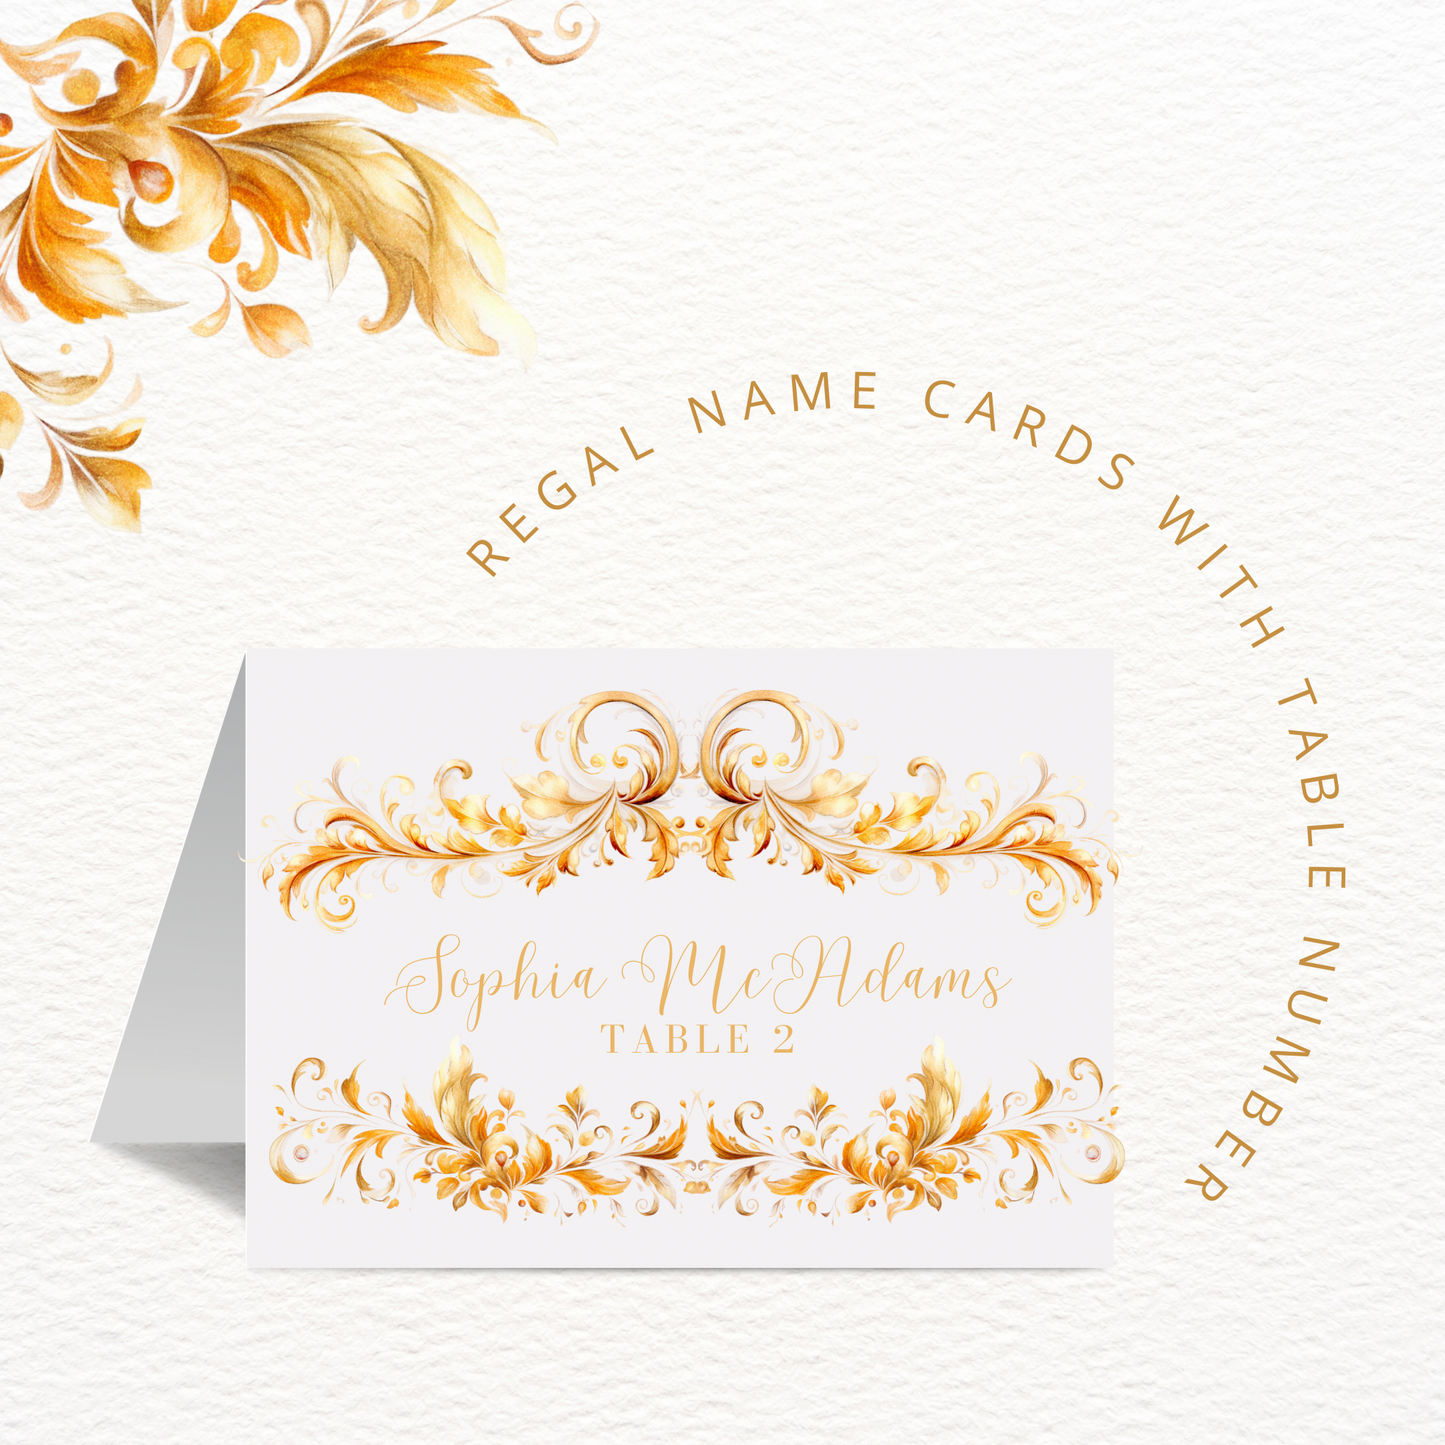 Regal Gold Wedding Place Card Template, Printable Place Cards, Gold Recency Wedding Template, Calligraphy, DOWNLOAD, Editable in FREE Canva